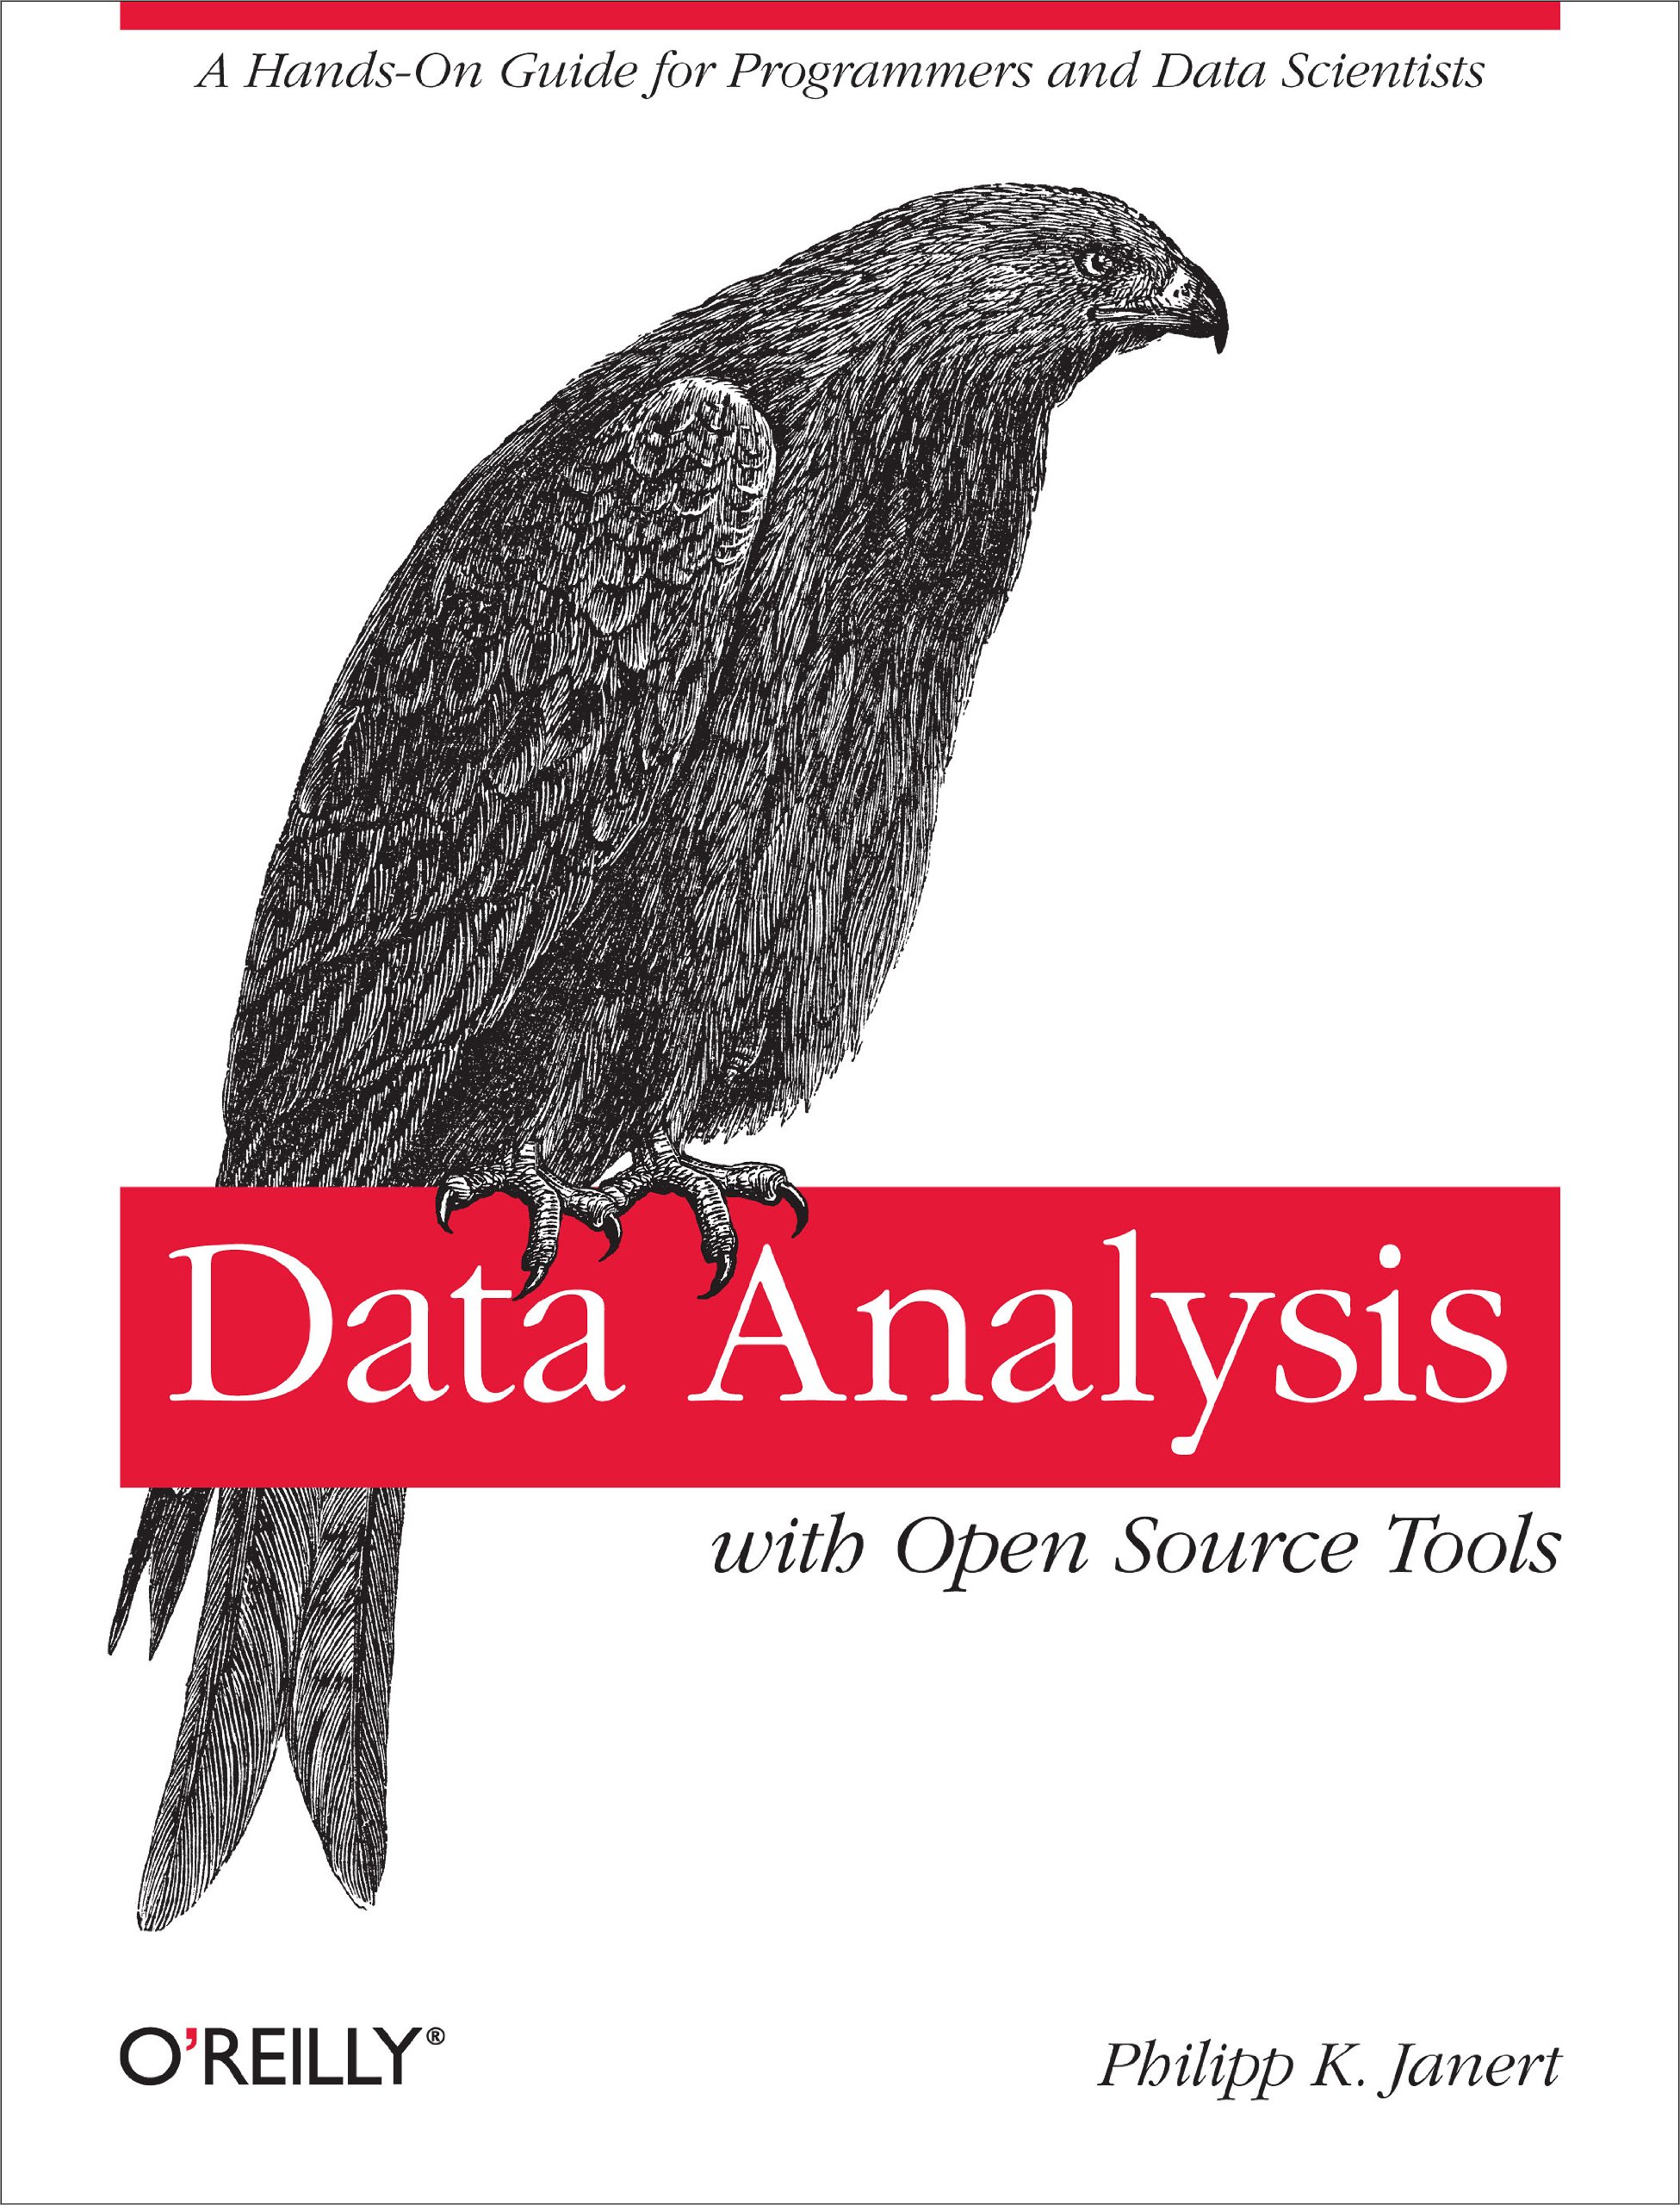 Data Analysis with Open Source Tools: A Hands-On Guide for Programmers and Data Scientists by Philipp K. Janert